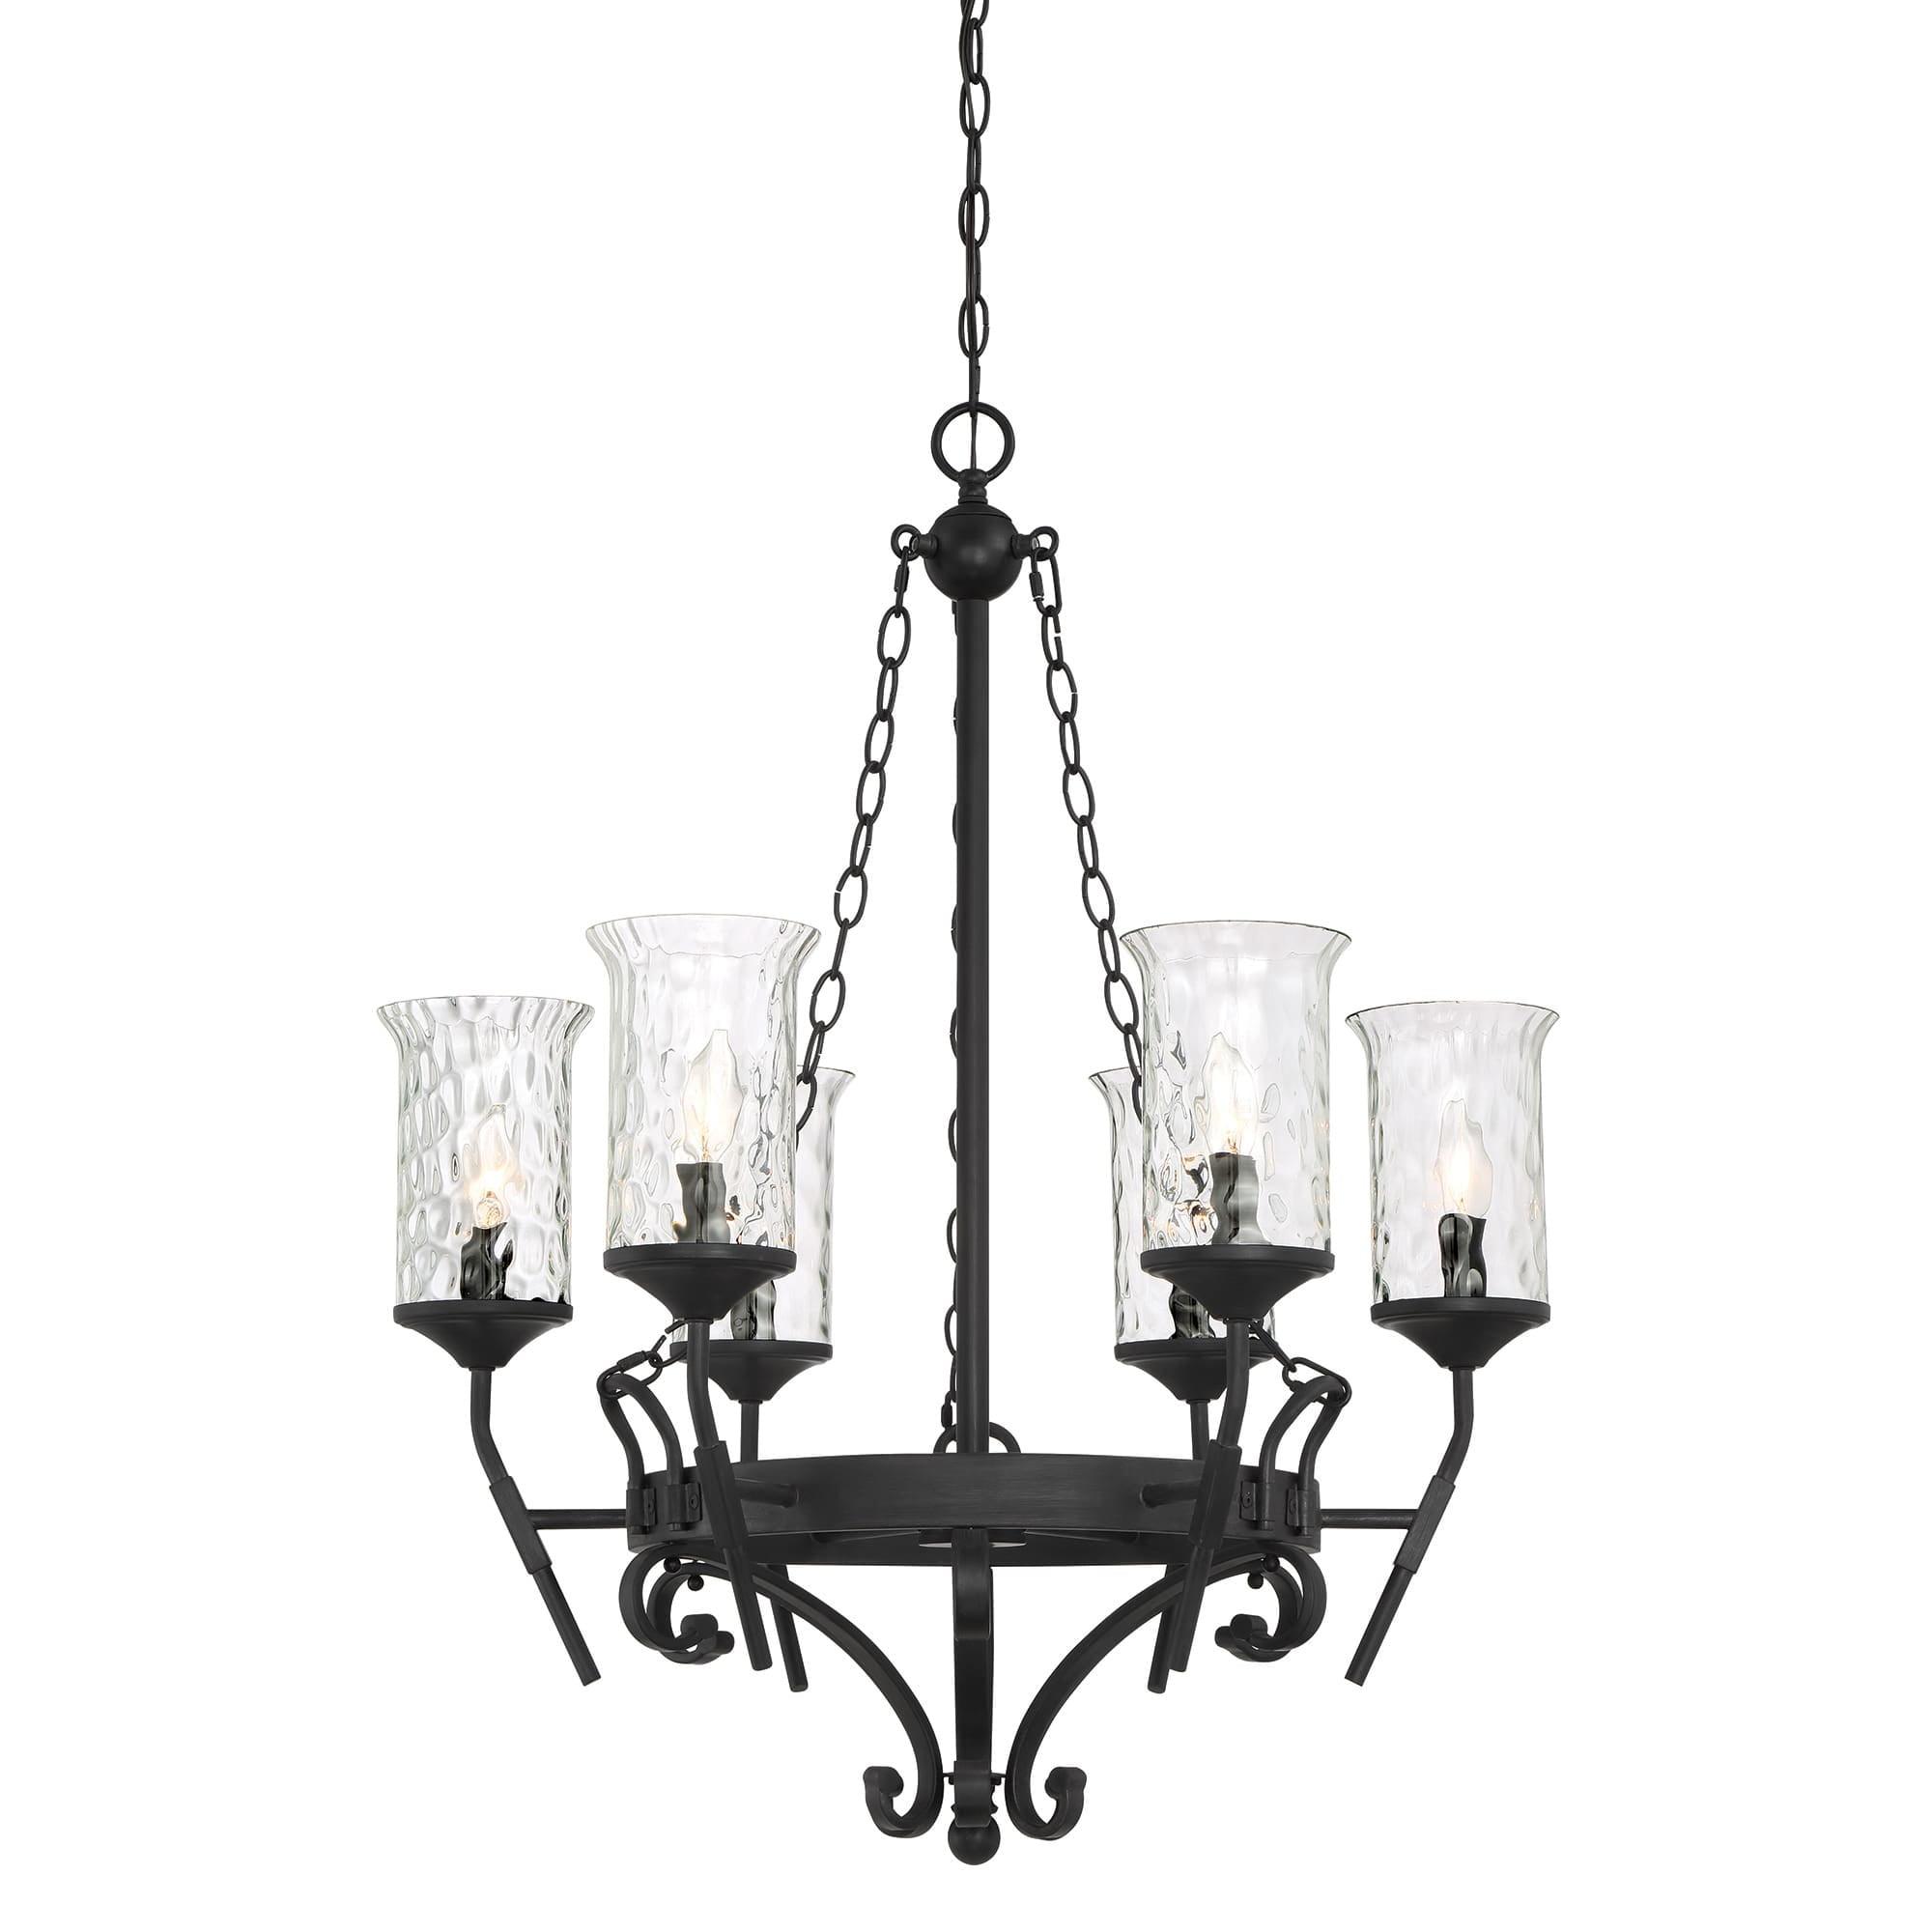 Amilla 33.75'' Rustic Iron Finish 6-Light Chandelier with Hammered Glass